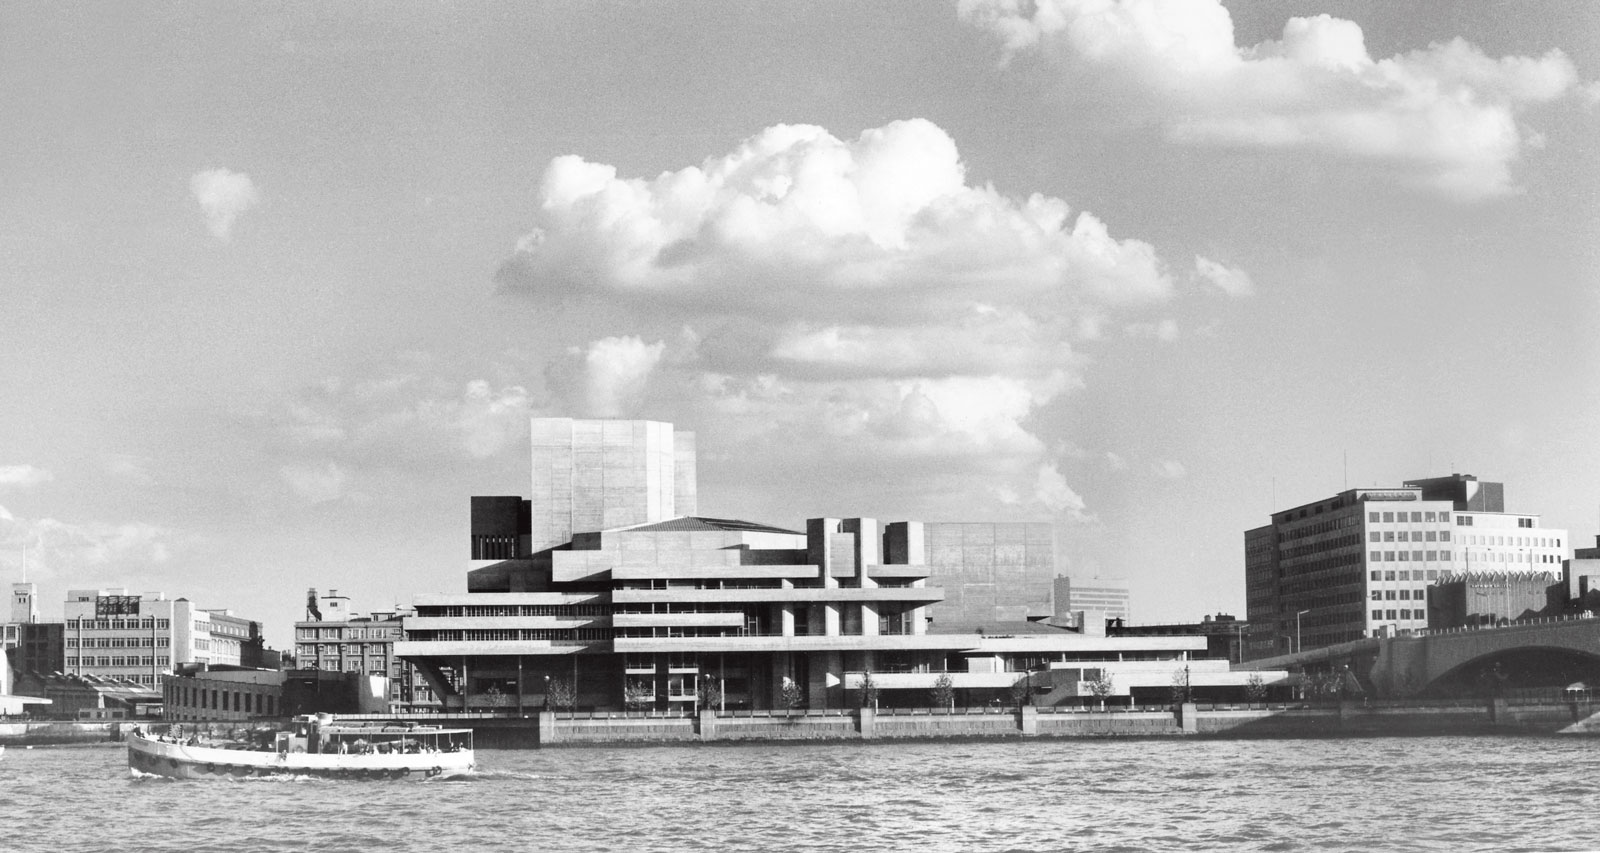 The National Theatre as featured in Atlas of Brutalist Architecture